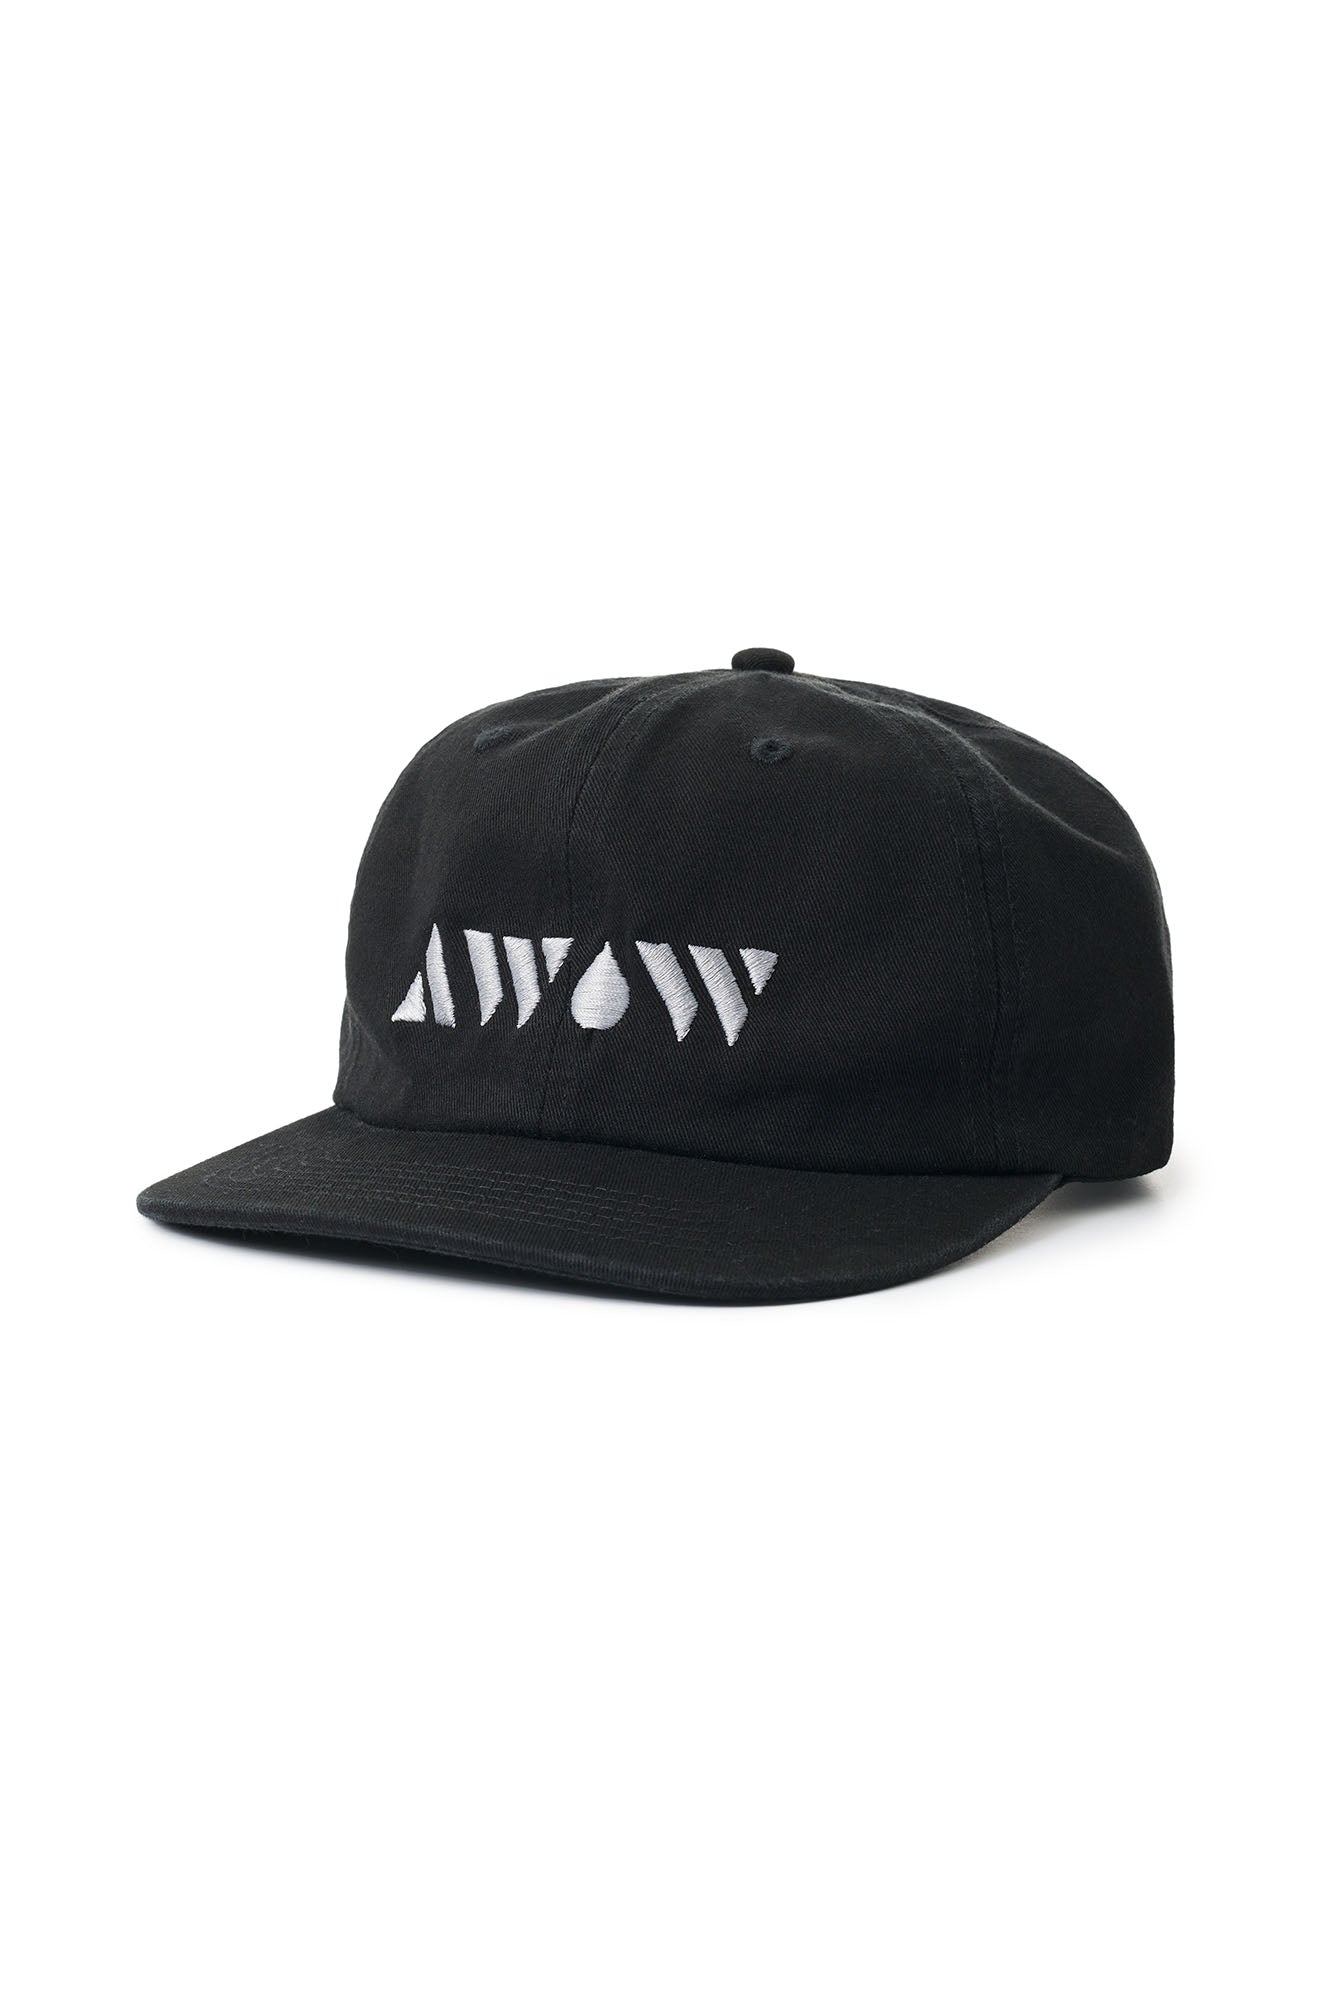 AWOW 6-PANEL STAMP HAT